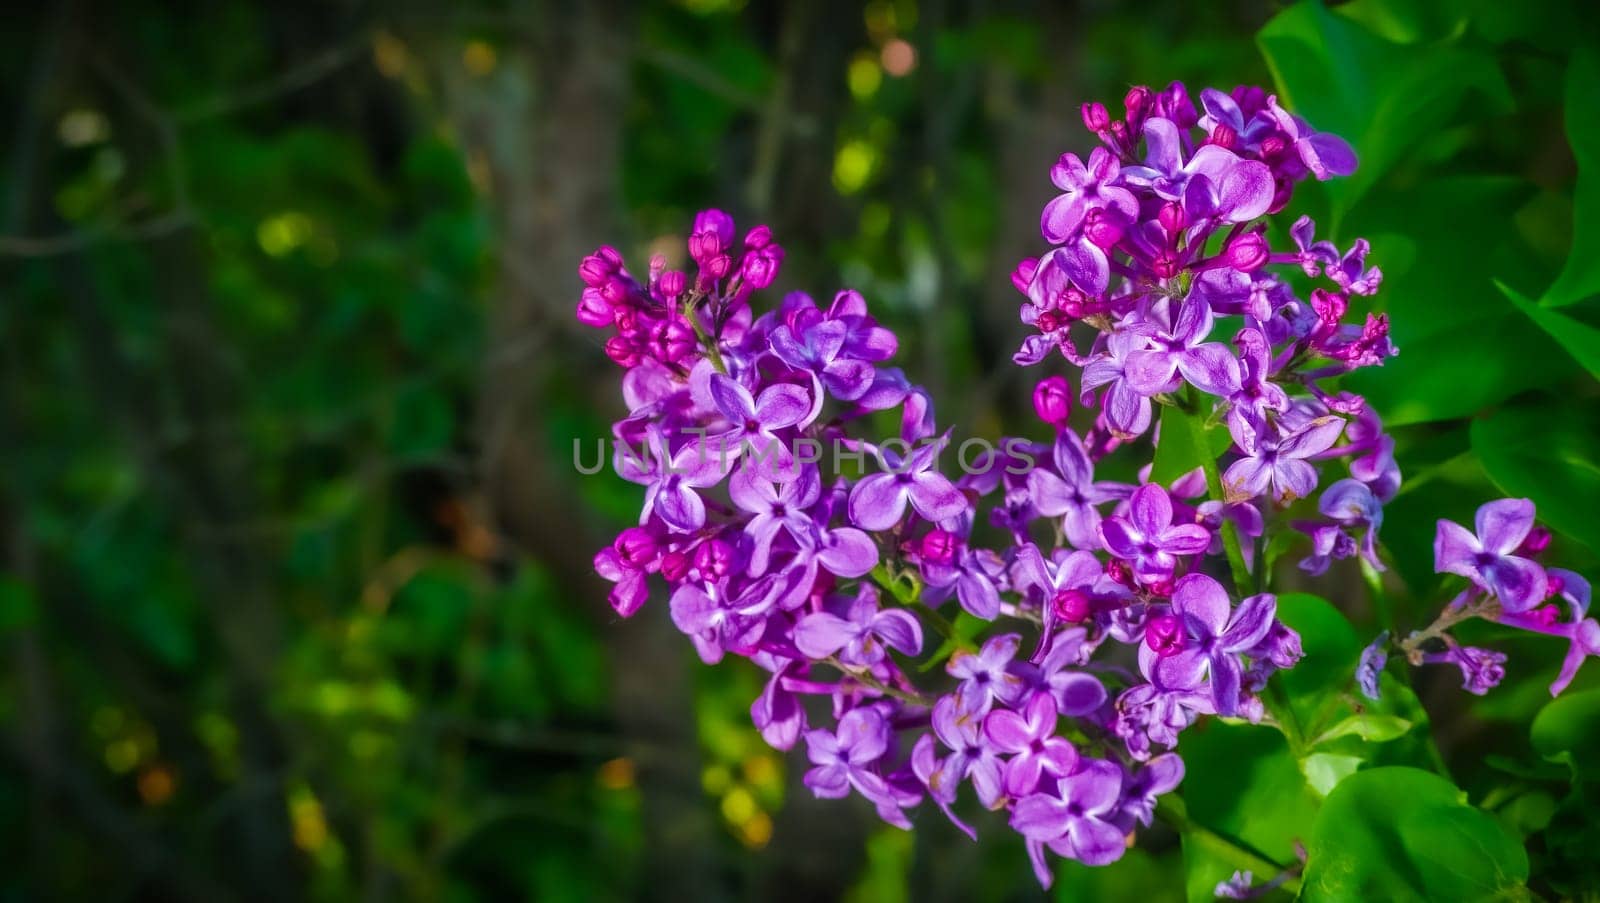 Beautiful flowering branch of lilac flowers close-up macro shot with blurry background. Spring nature floral background, pink purple lilac flowers. Greeting card banner with flowers for the holiday by lempro